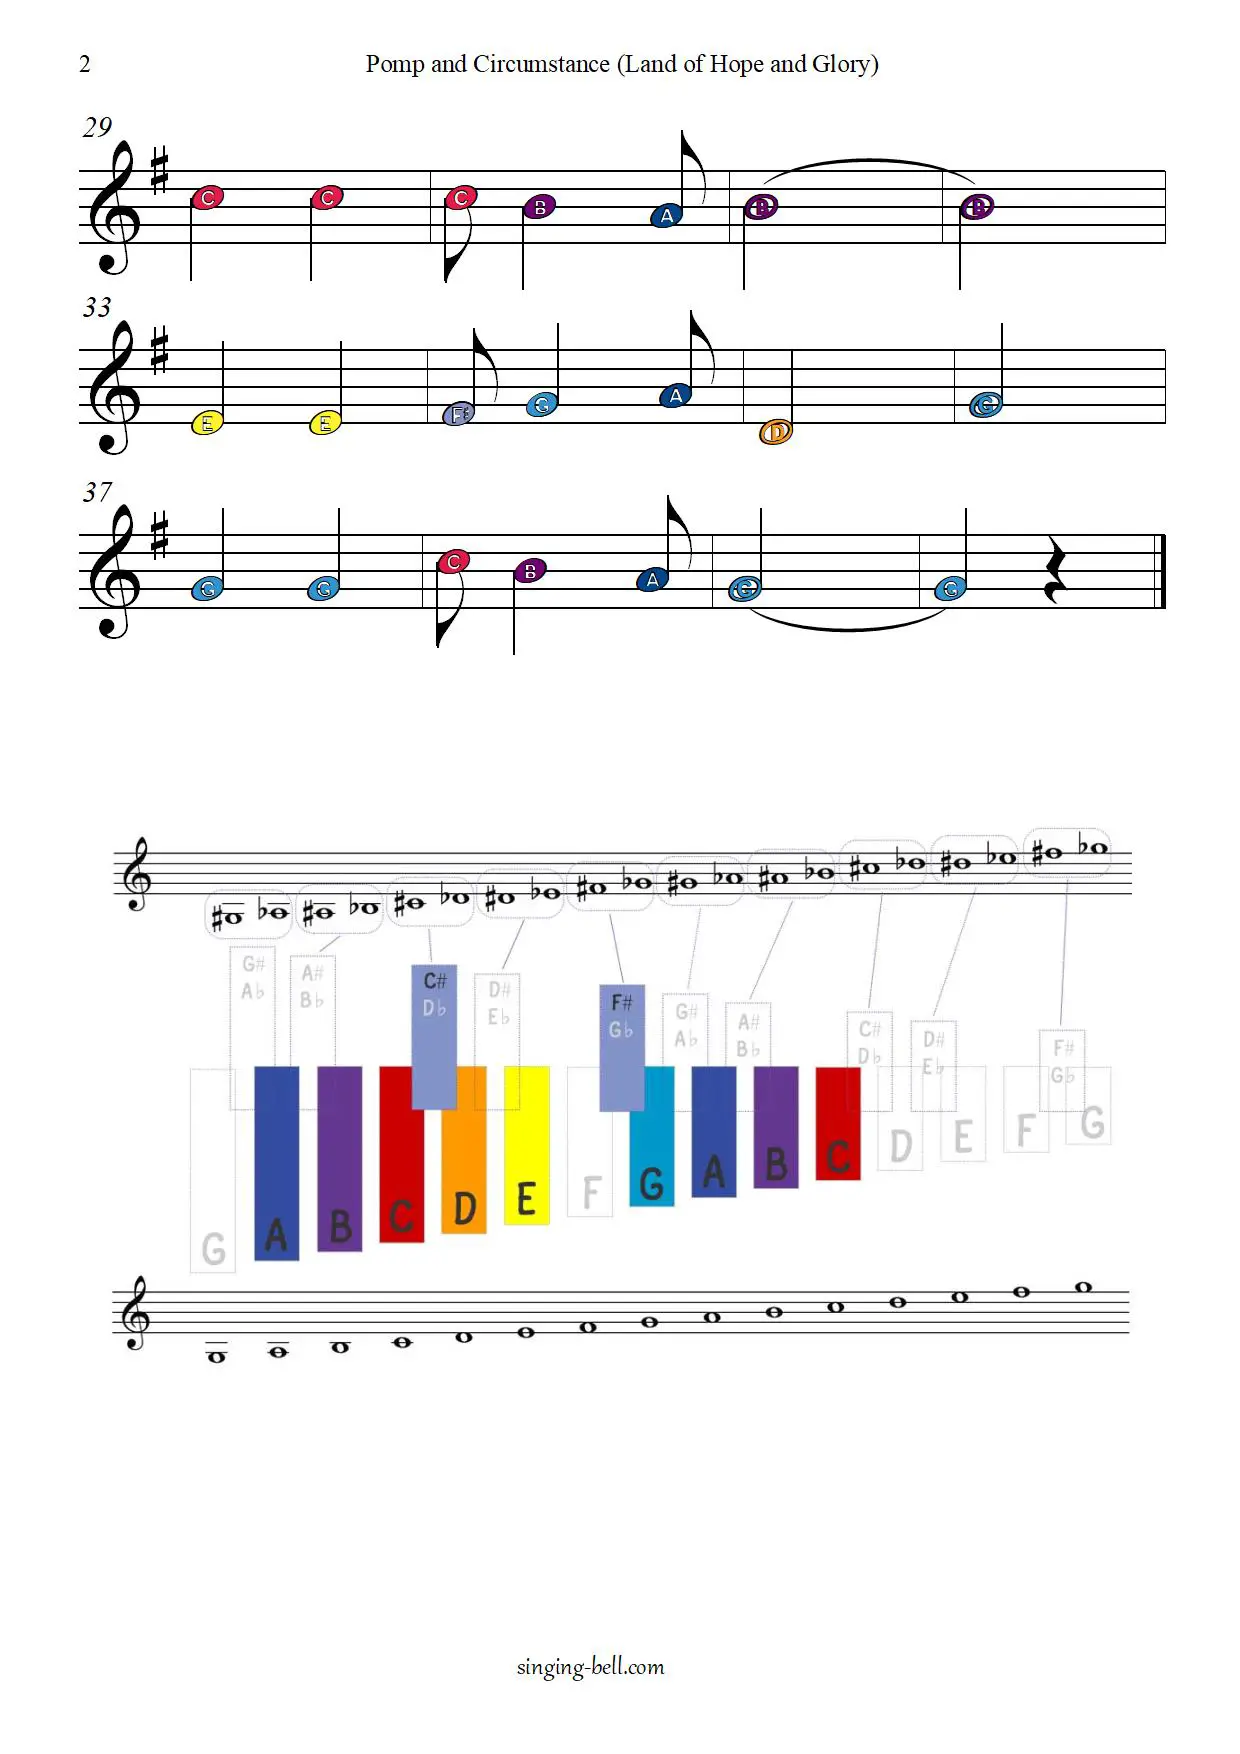 Pomp_and_Circumstance free xylophone glockenspiel sheet music color notes chart pdf page-2